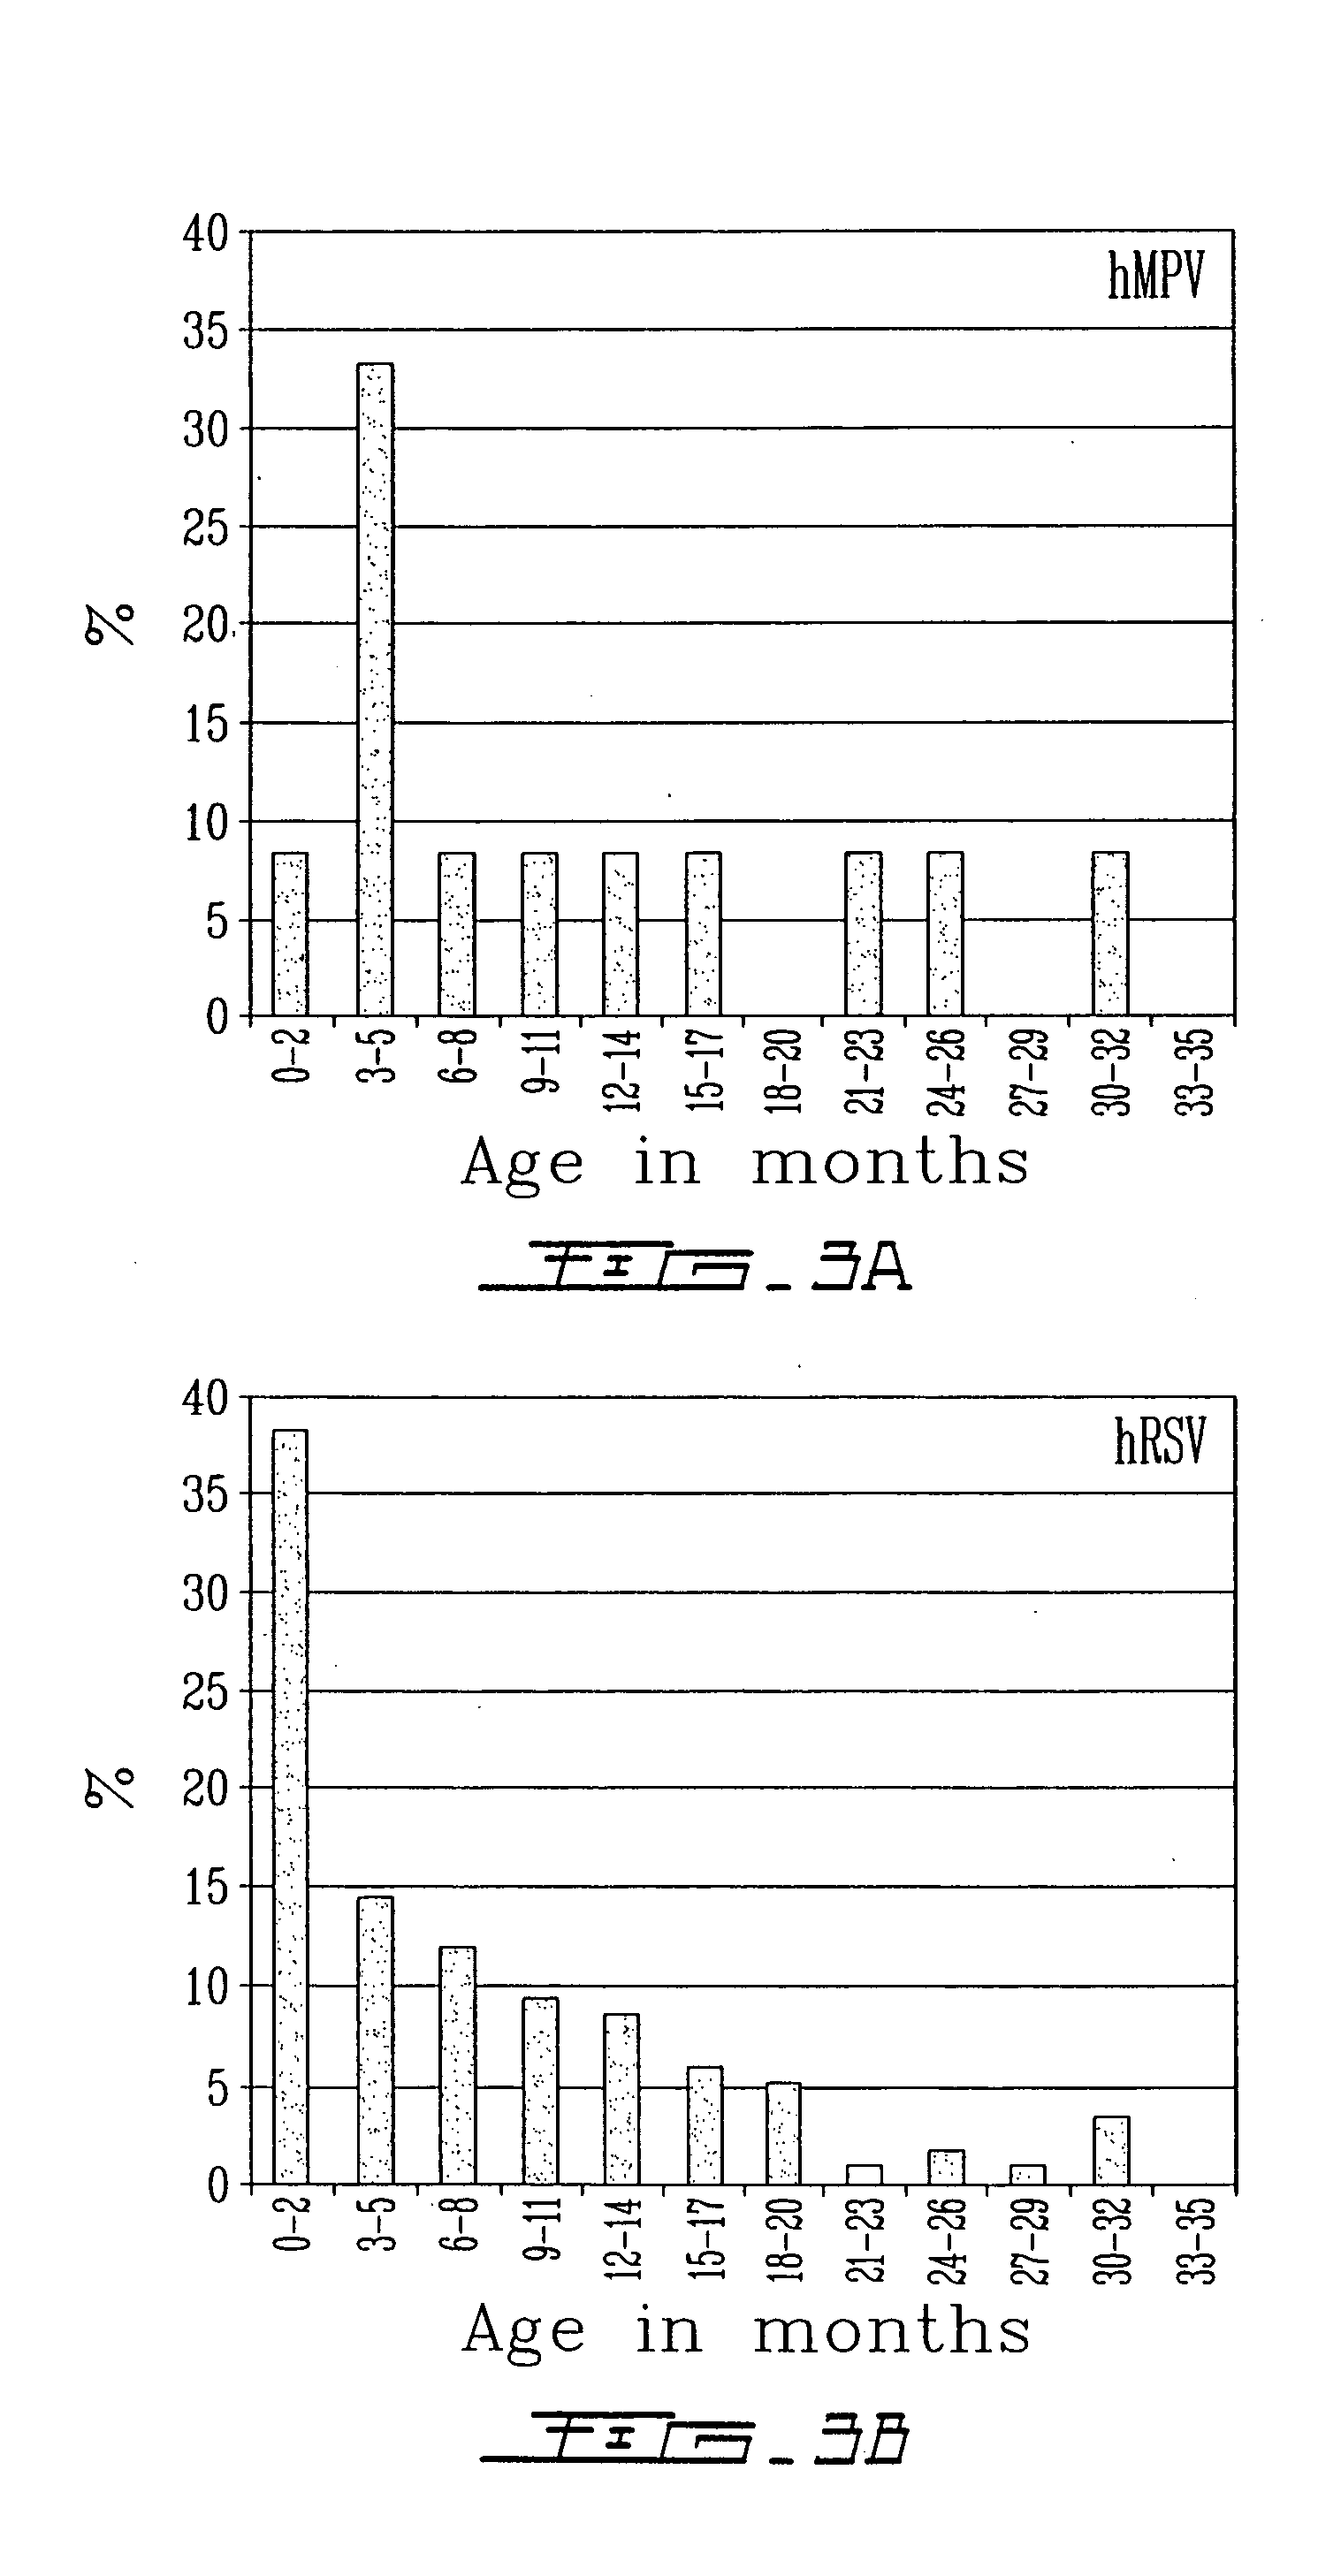 Molecular methods and compositions for detecting and quantifying respiratory viruses